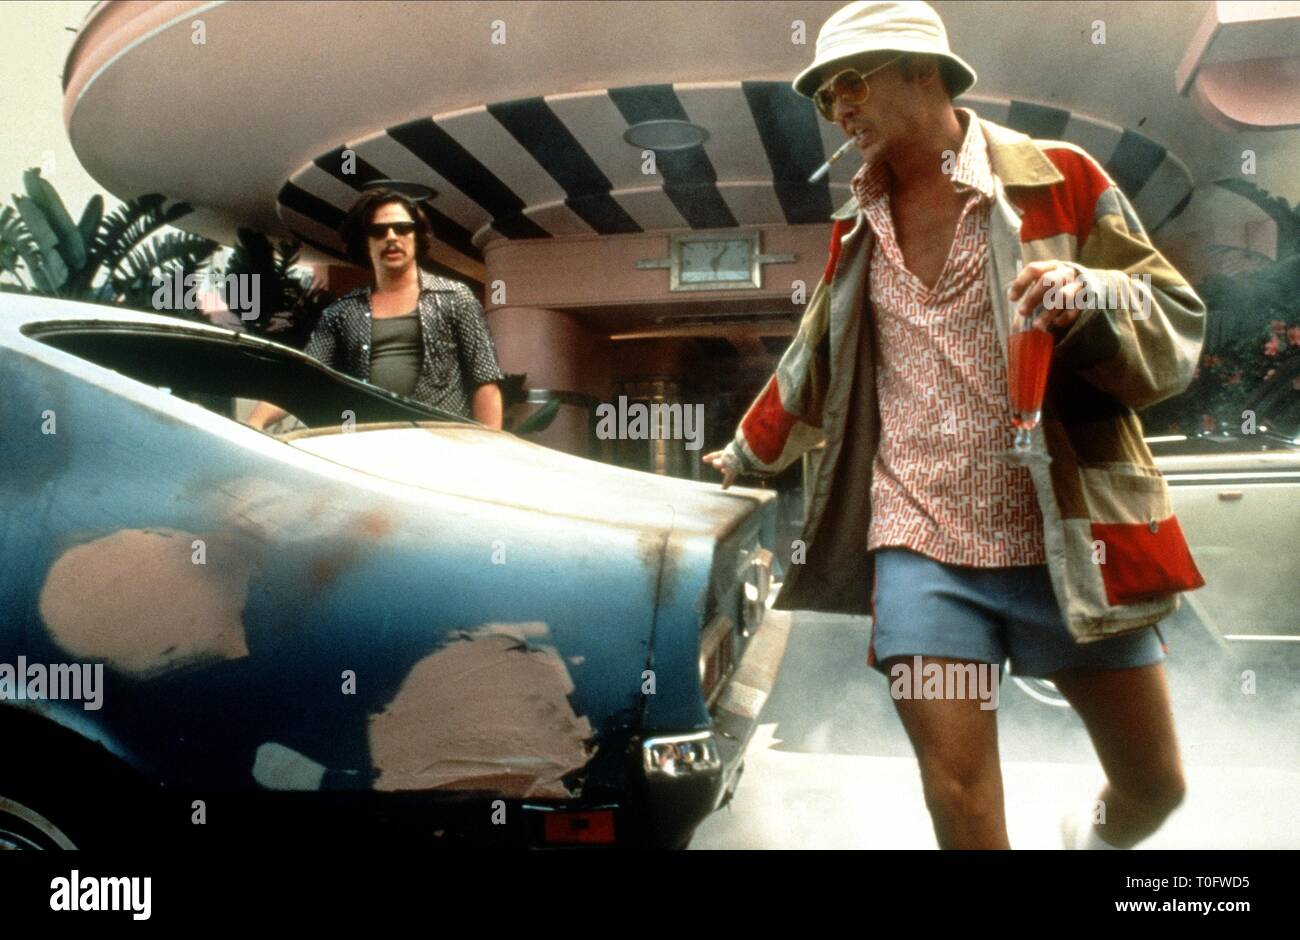 JOHNNY DEPP, FEAR AND LOATHING IN LAS VEGAS, 1998 Stock Photo - Alamy